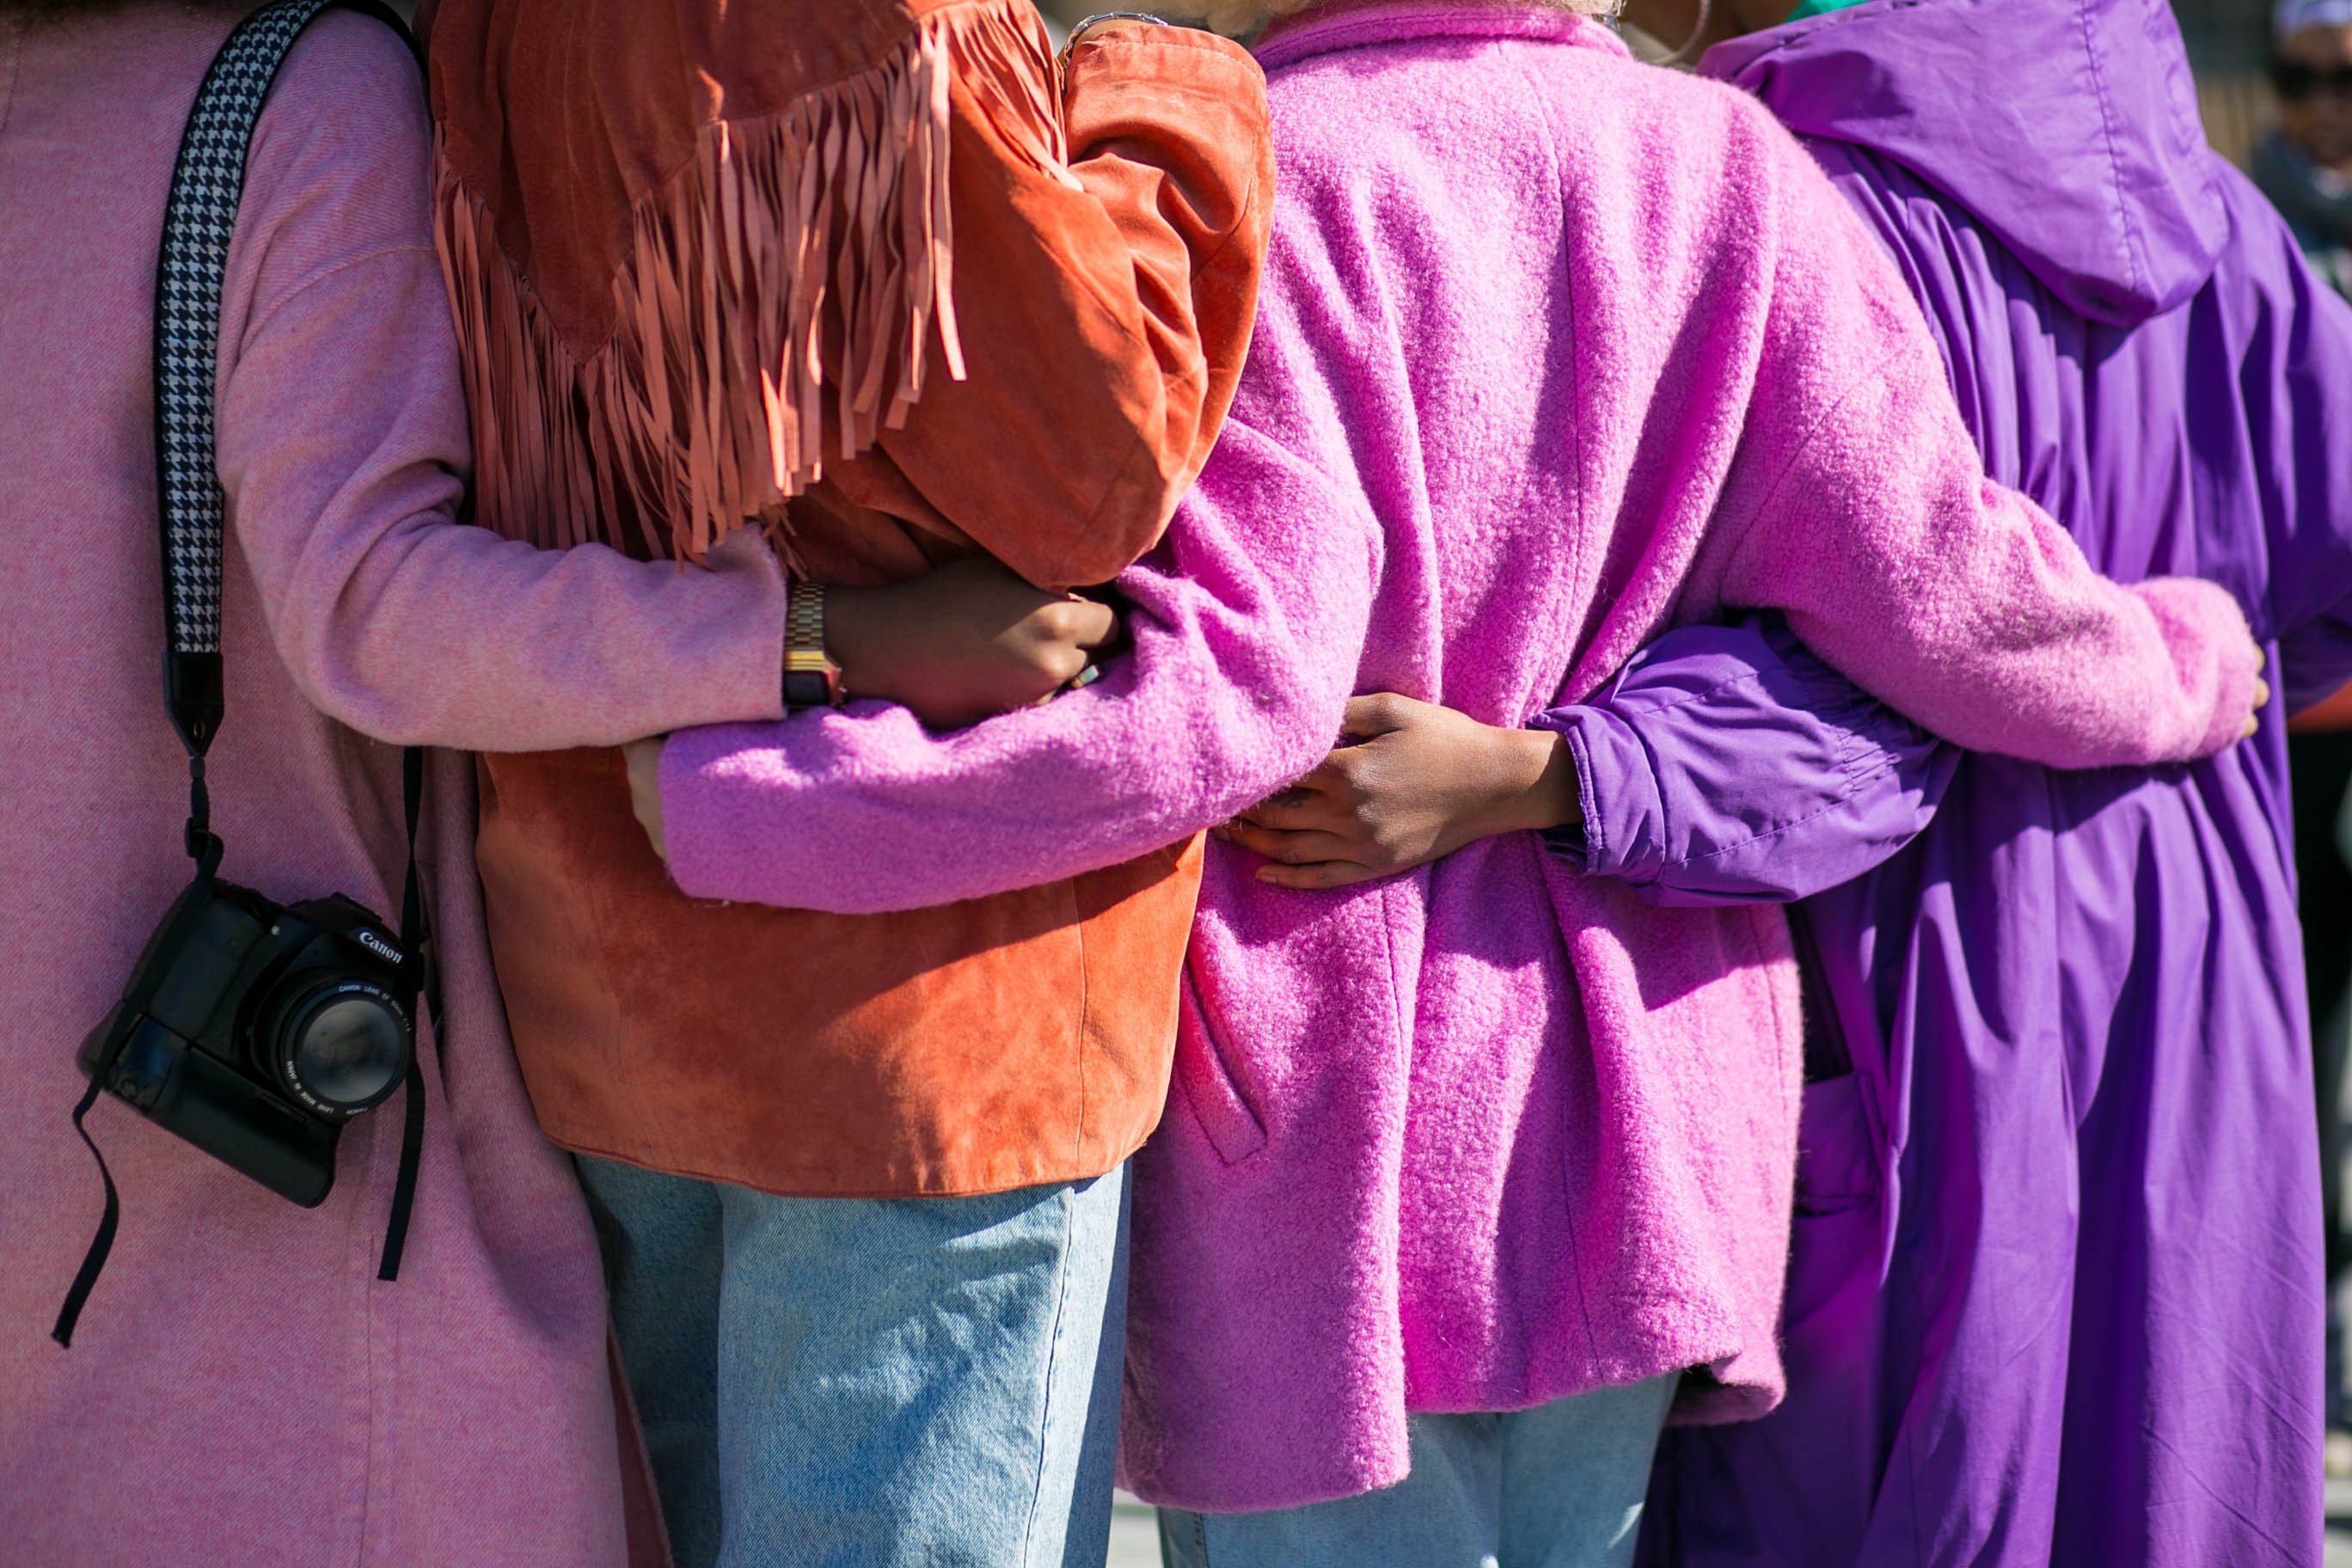 The backs of four people embracing one another in brightly-colored jackets, one of whom has a high quality camera around her shoulder